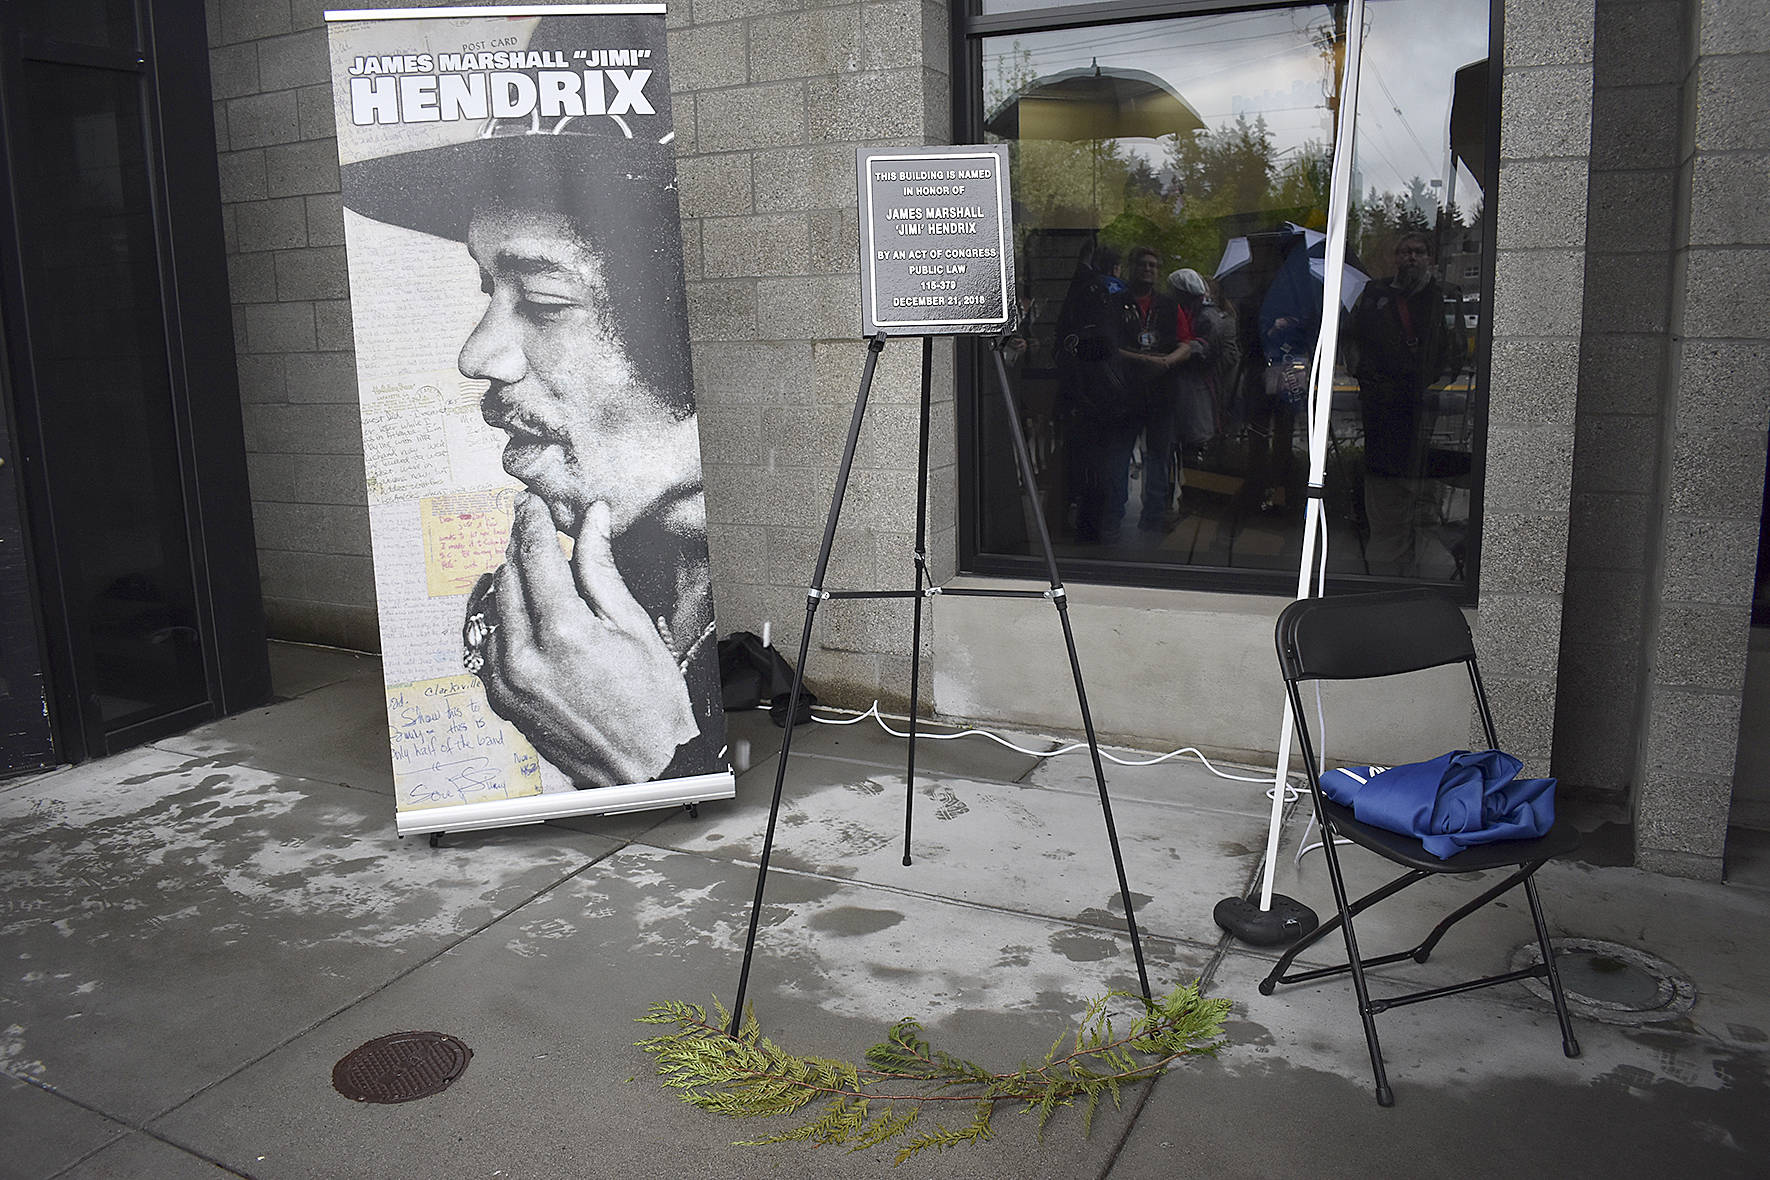 The plaque honoring Hendrix legacy at the Renton Highlands Post Office will be on display in the lobby. Photo by Haley Ausbun